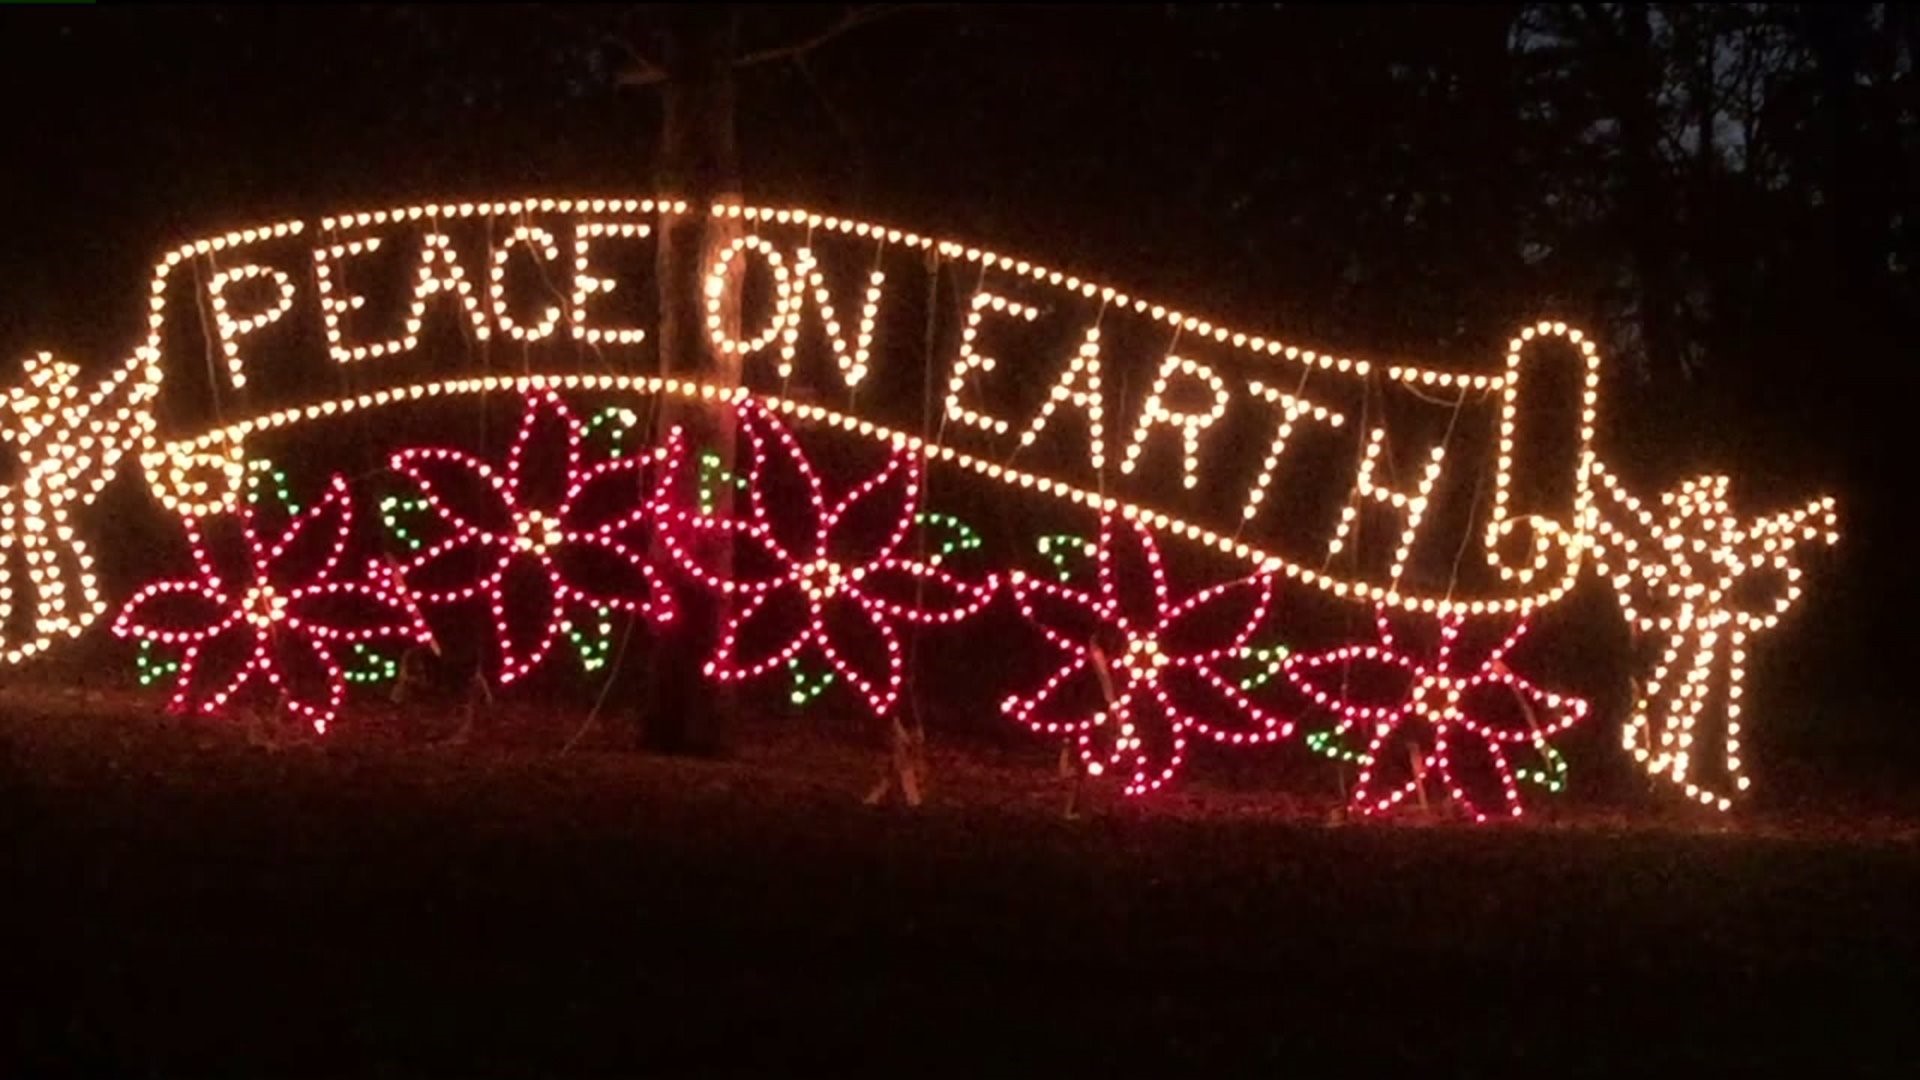 Nay Aug Park Turns Into a Winter Wonderland With Annual Holiday Light Show